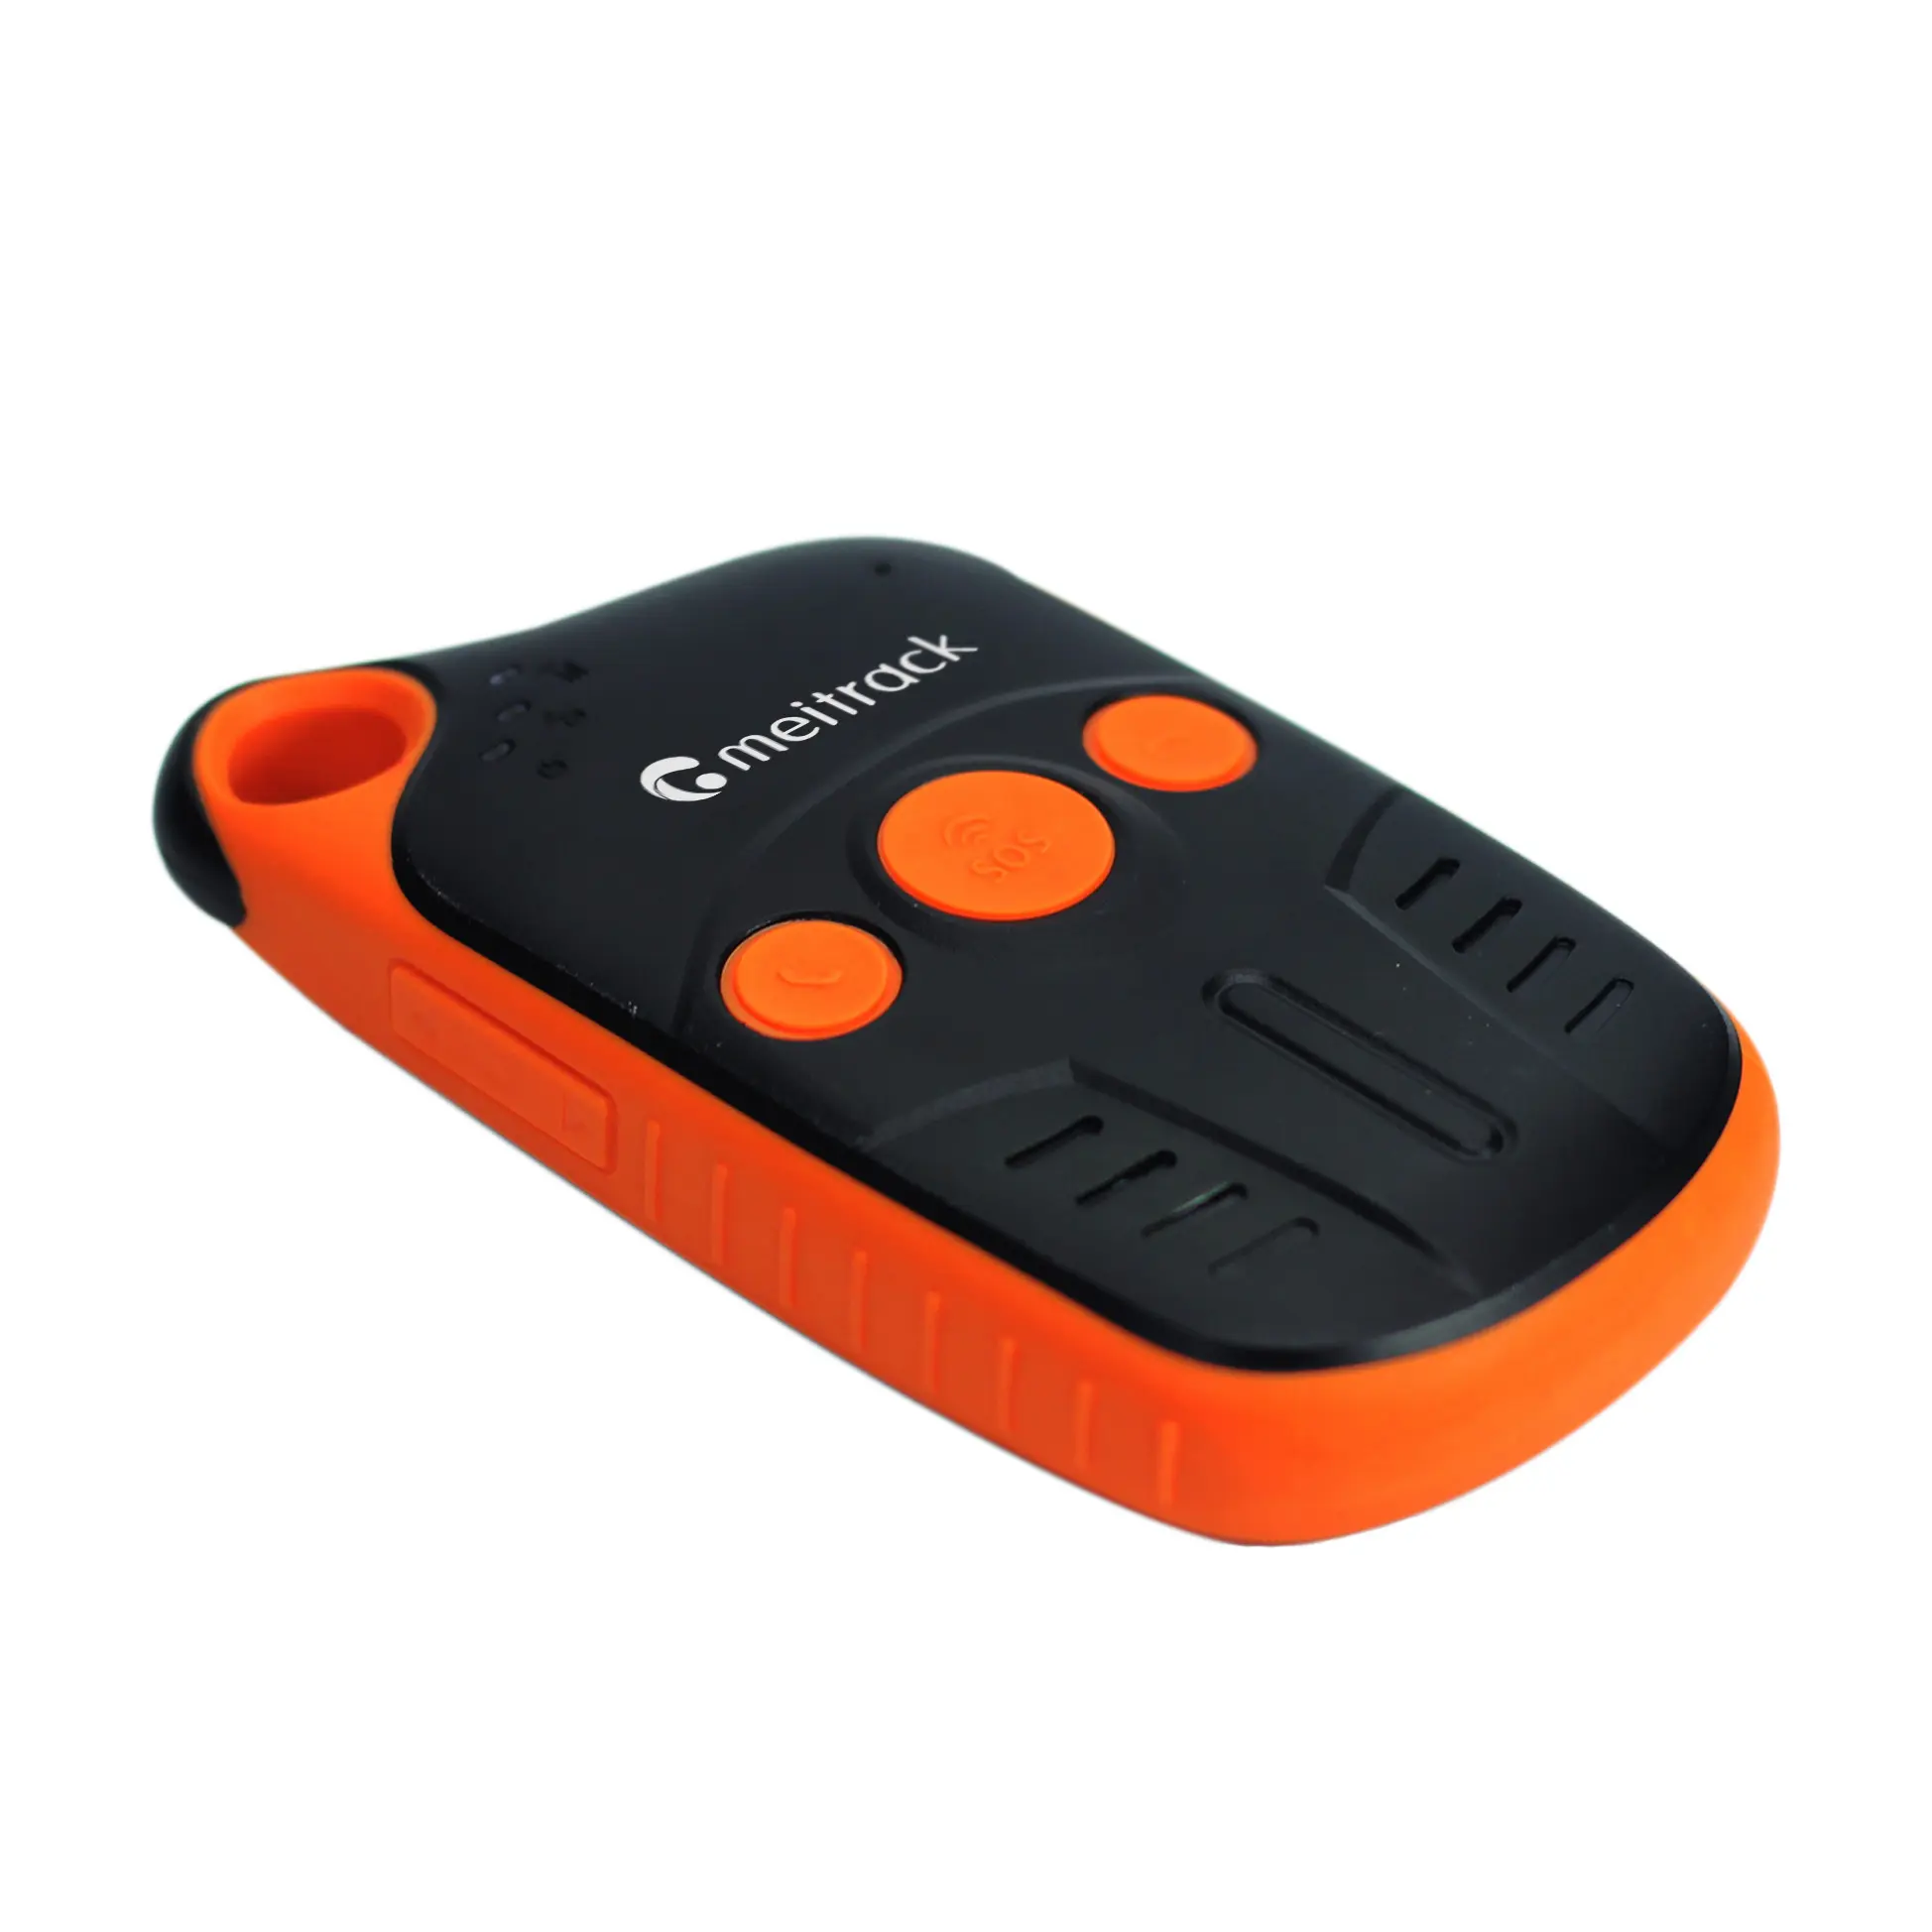 Gps Gps Tracker Meitrack P99L Personal GPS Tracker With IP67 Water Resistance